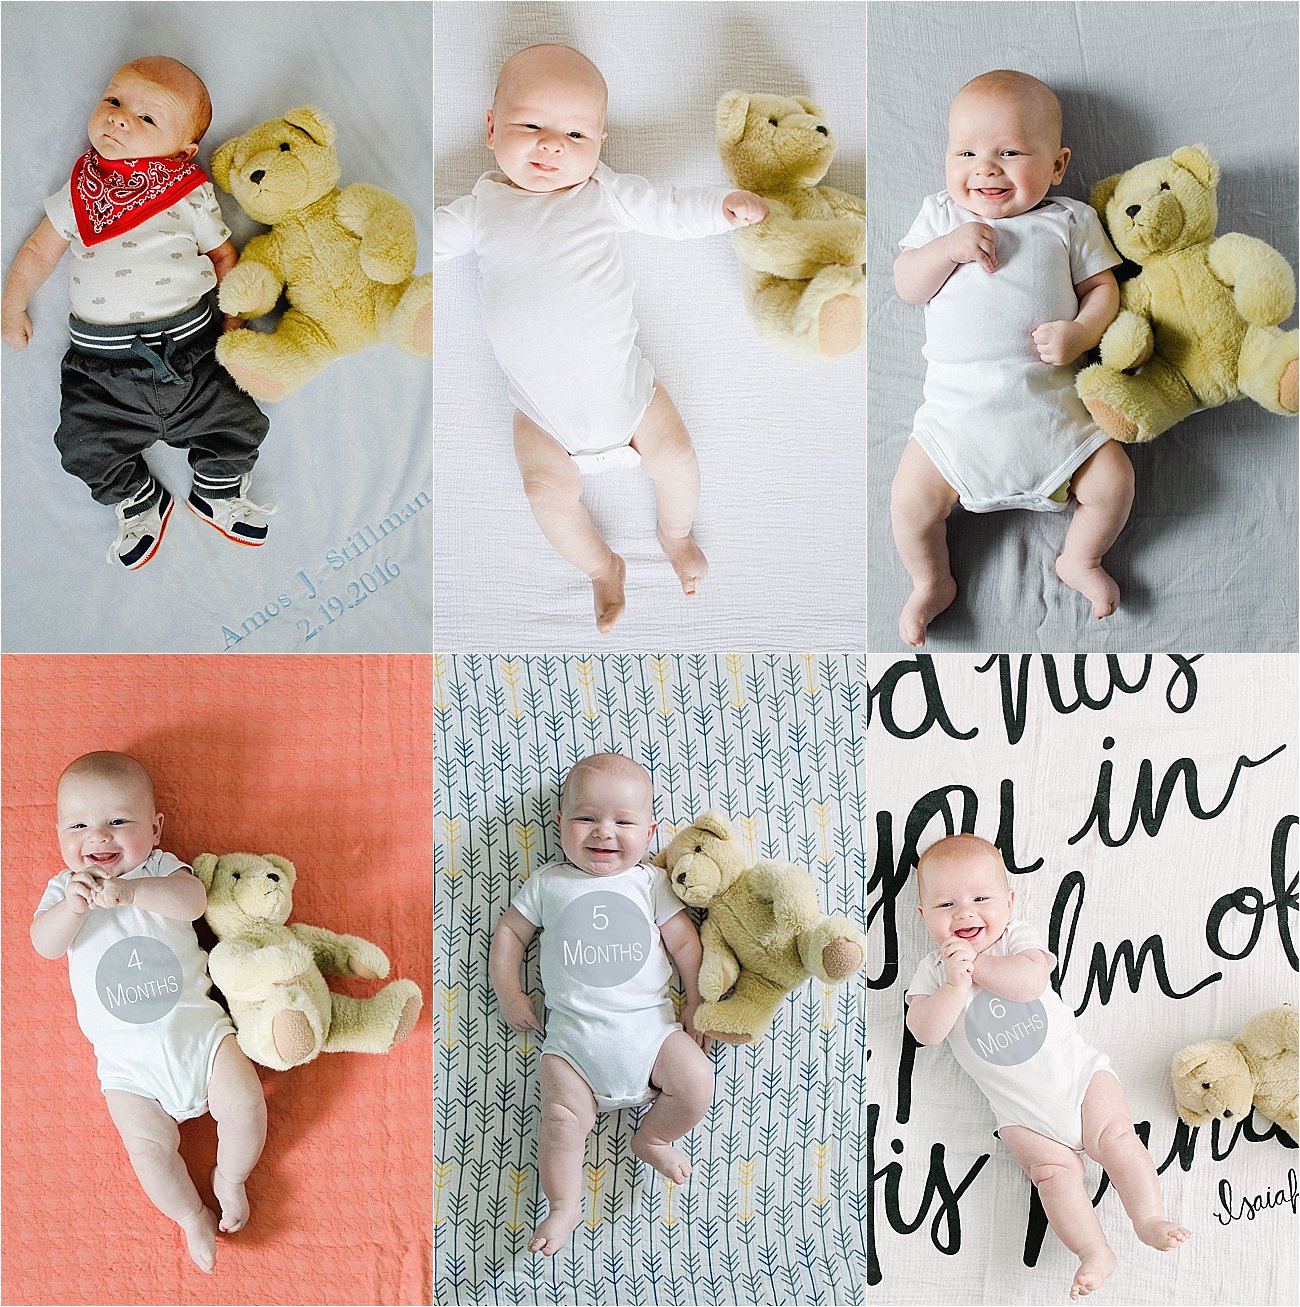 amos-james-one-month-1-photo-5-2